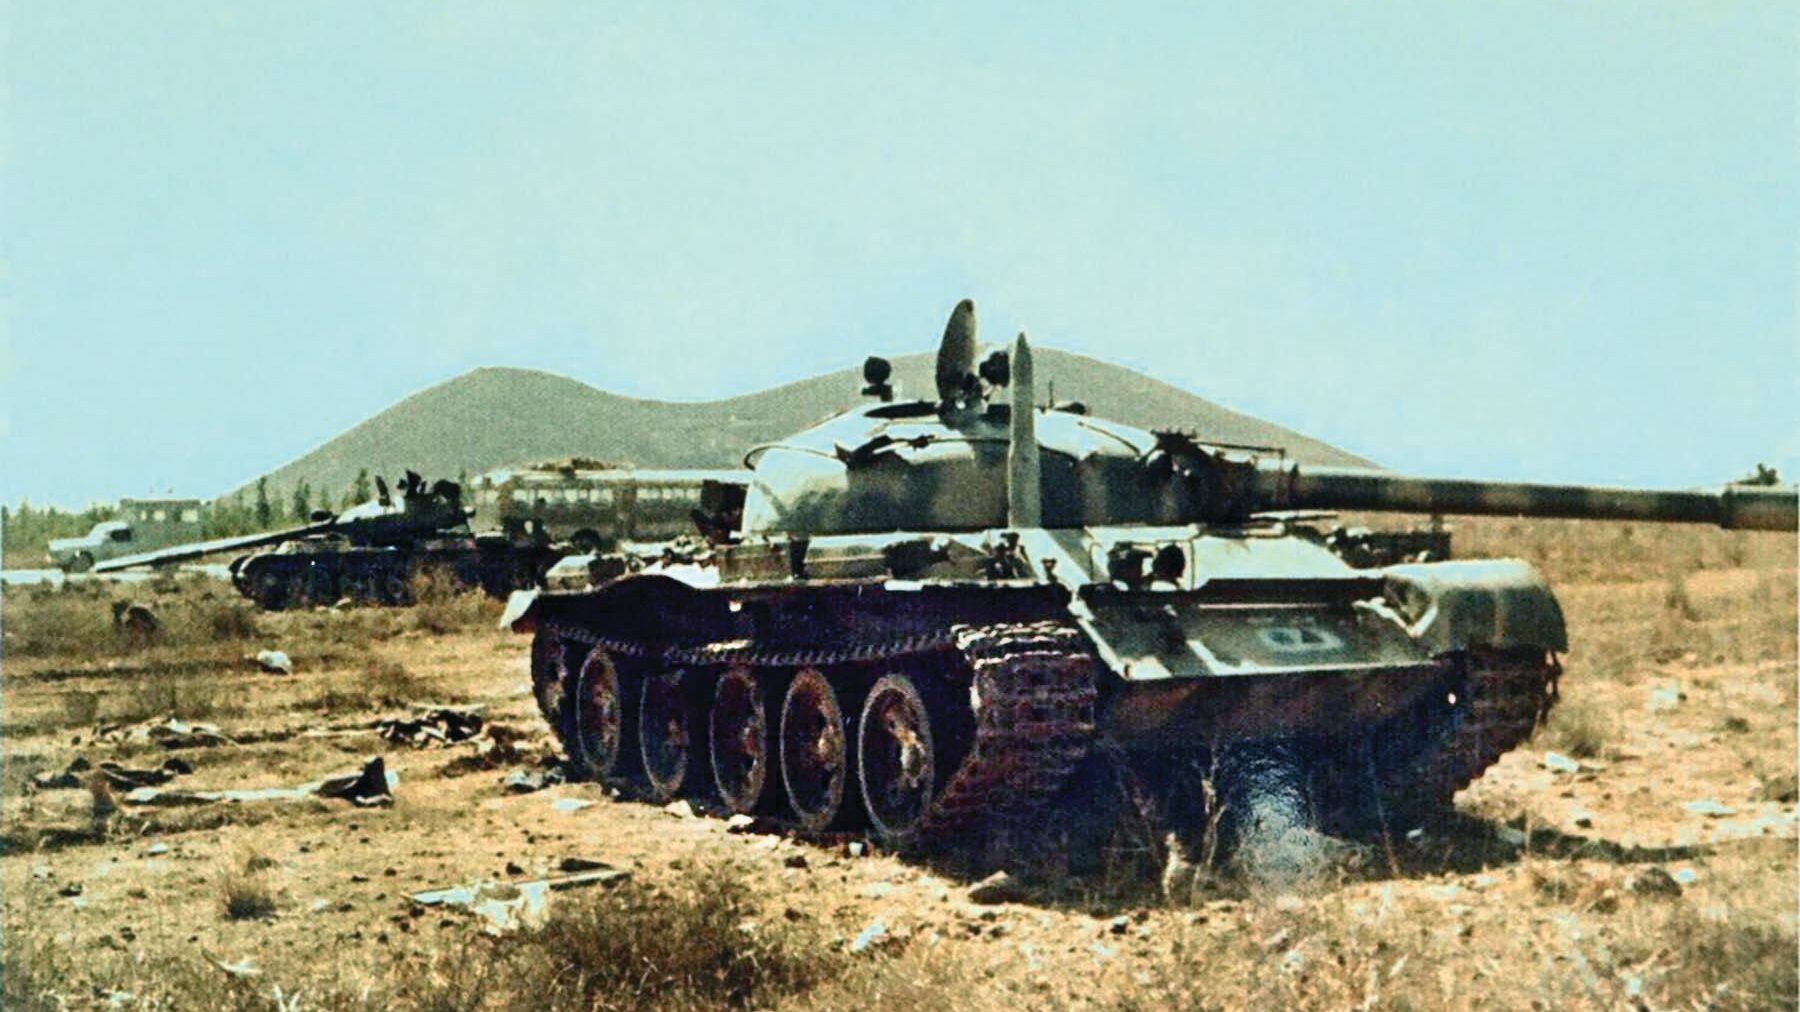 A Syrian T-62 Soviet tank destroyed near the Israeli settlement of Ortal in the Golan Heights.